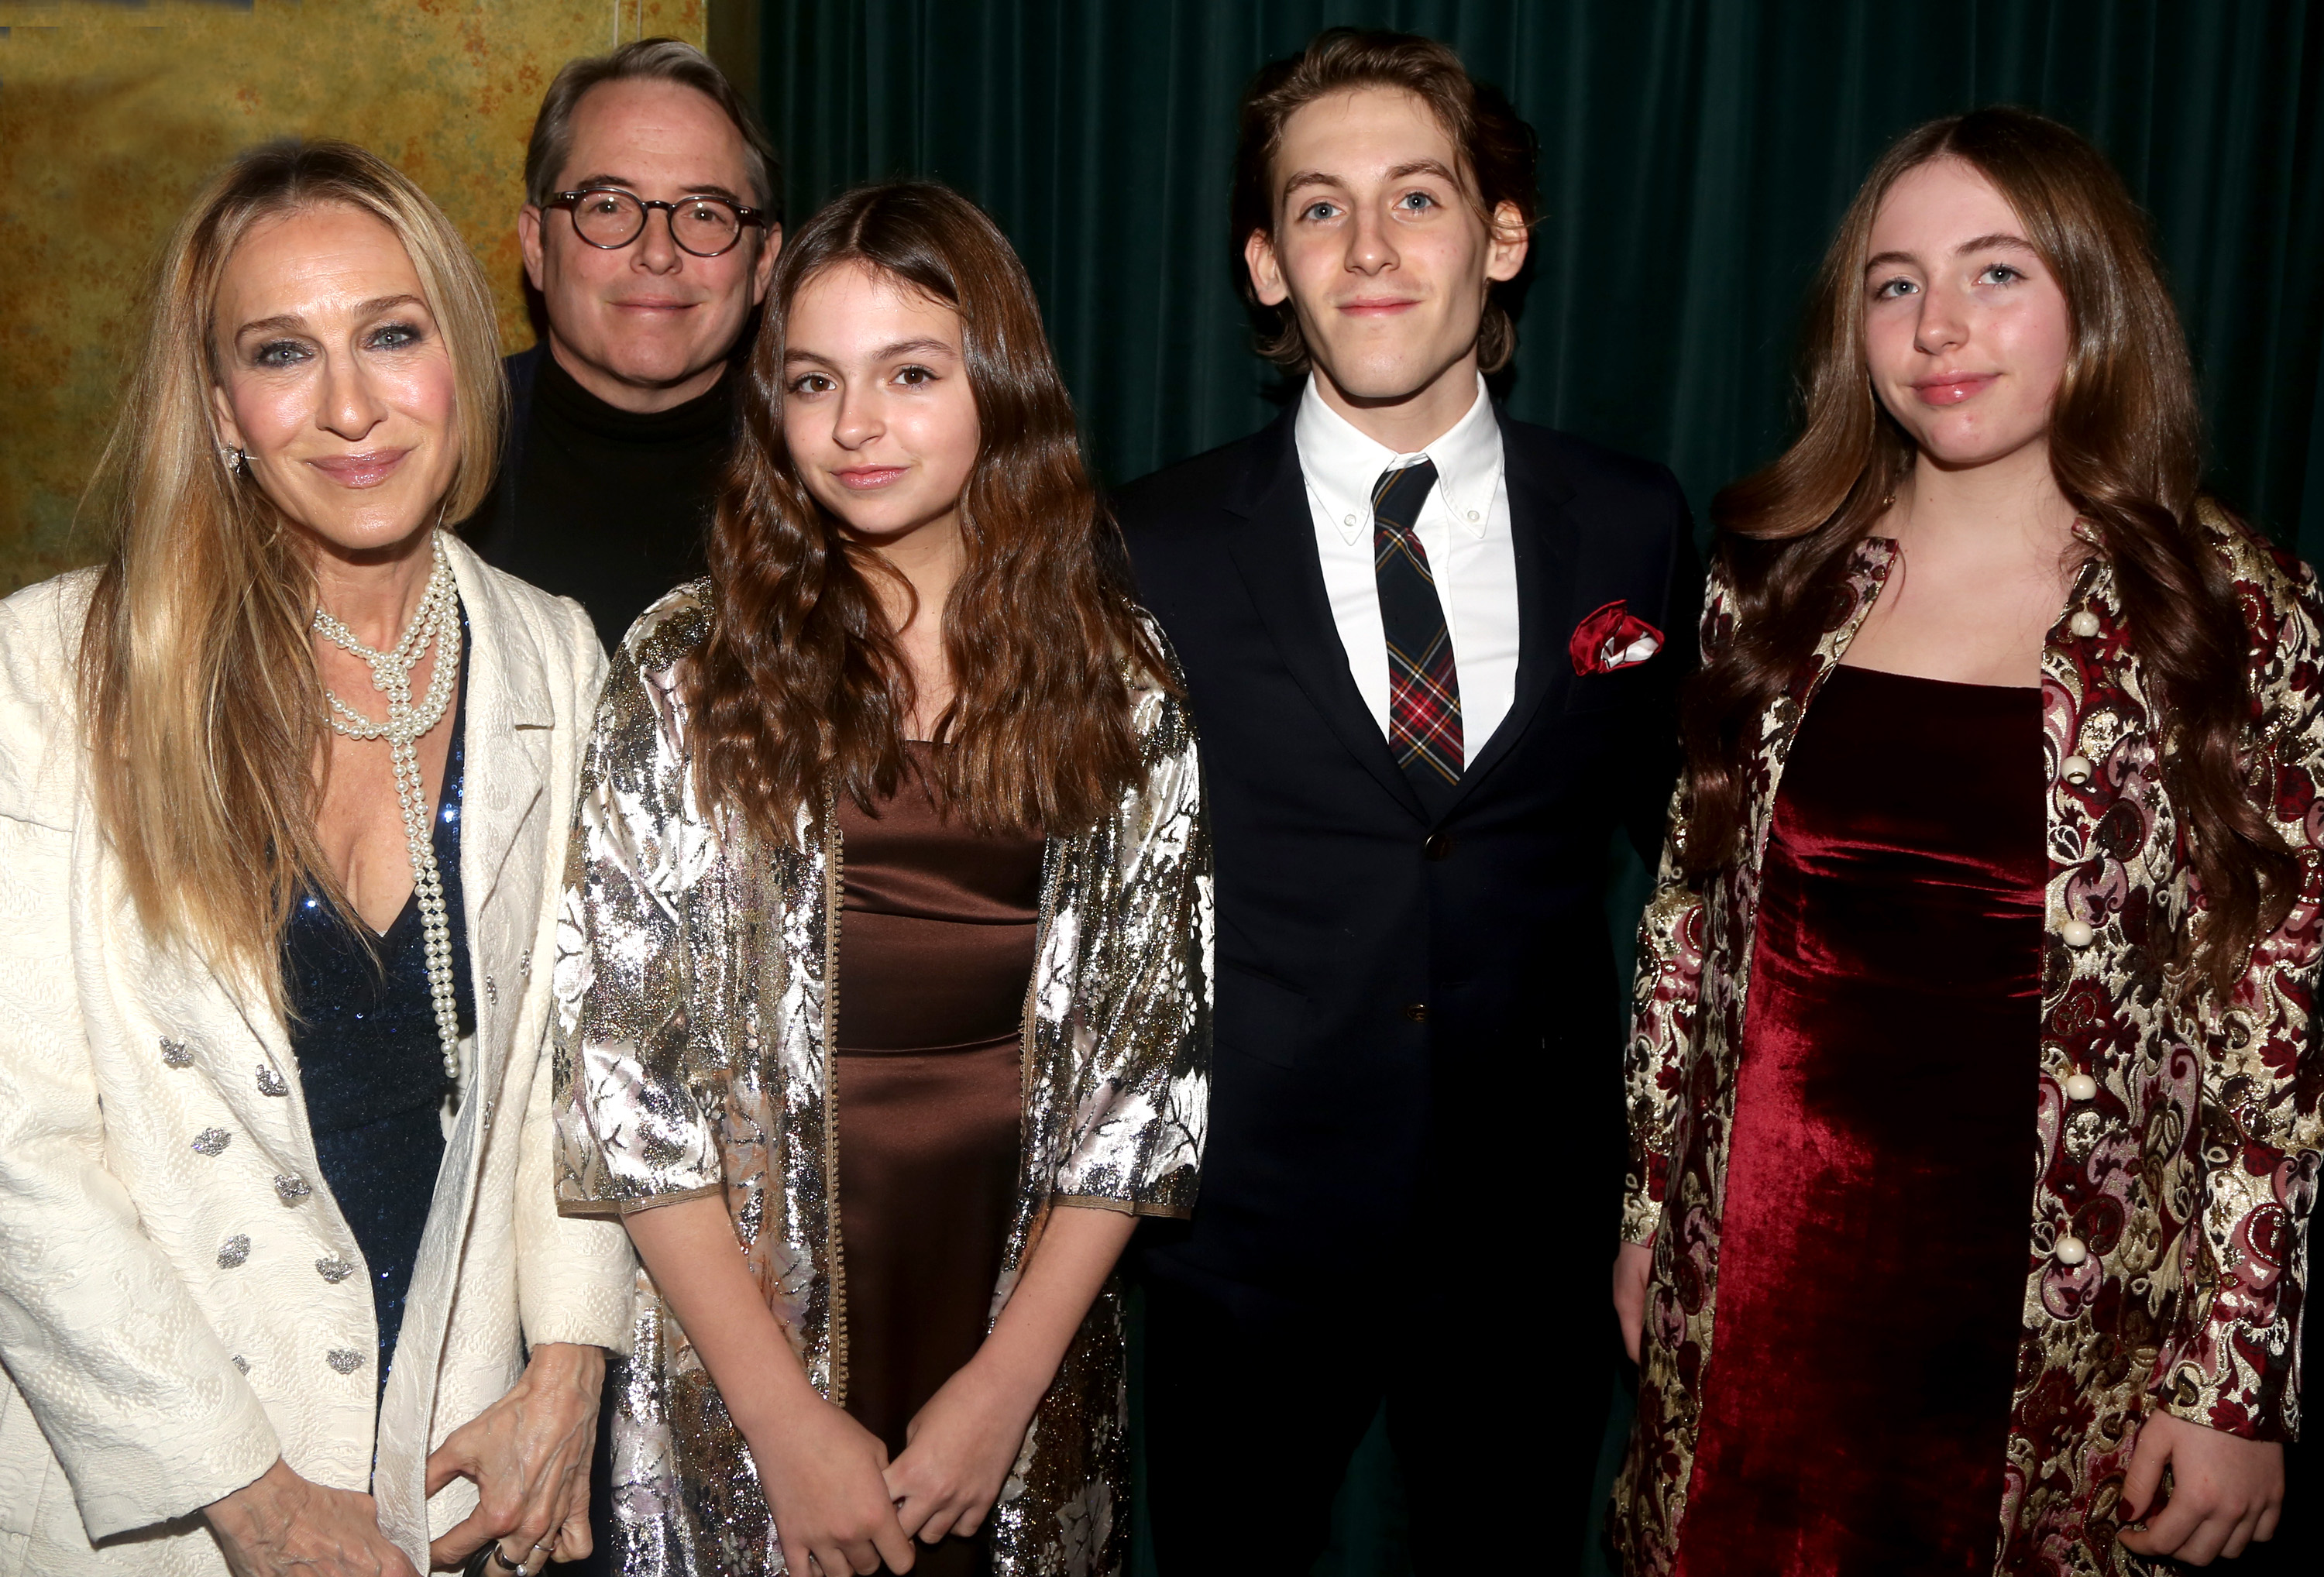 <p><span>Twins Loretta Broderick and Tabitha Broderick (who were born in 2009) flanked their big brother, college student James Wilkie Broderick (who was born in 2002), as they joined parents <a href="https://www.wonderwall.com/celebrity/profiles/overview/sarah-jessica-parker-395.article">Sarah Jessica Parker</a> and husband Matthew Broderick at the opening night performance of the musical "Some Like It Hot!" on Broadway at the Shubert Theatre in New York City on Dec. 11, 2022.</span></p>